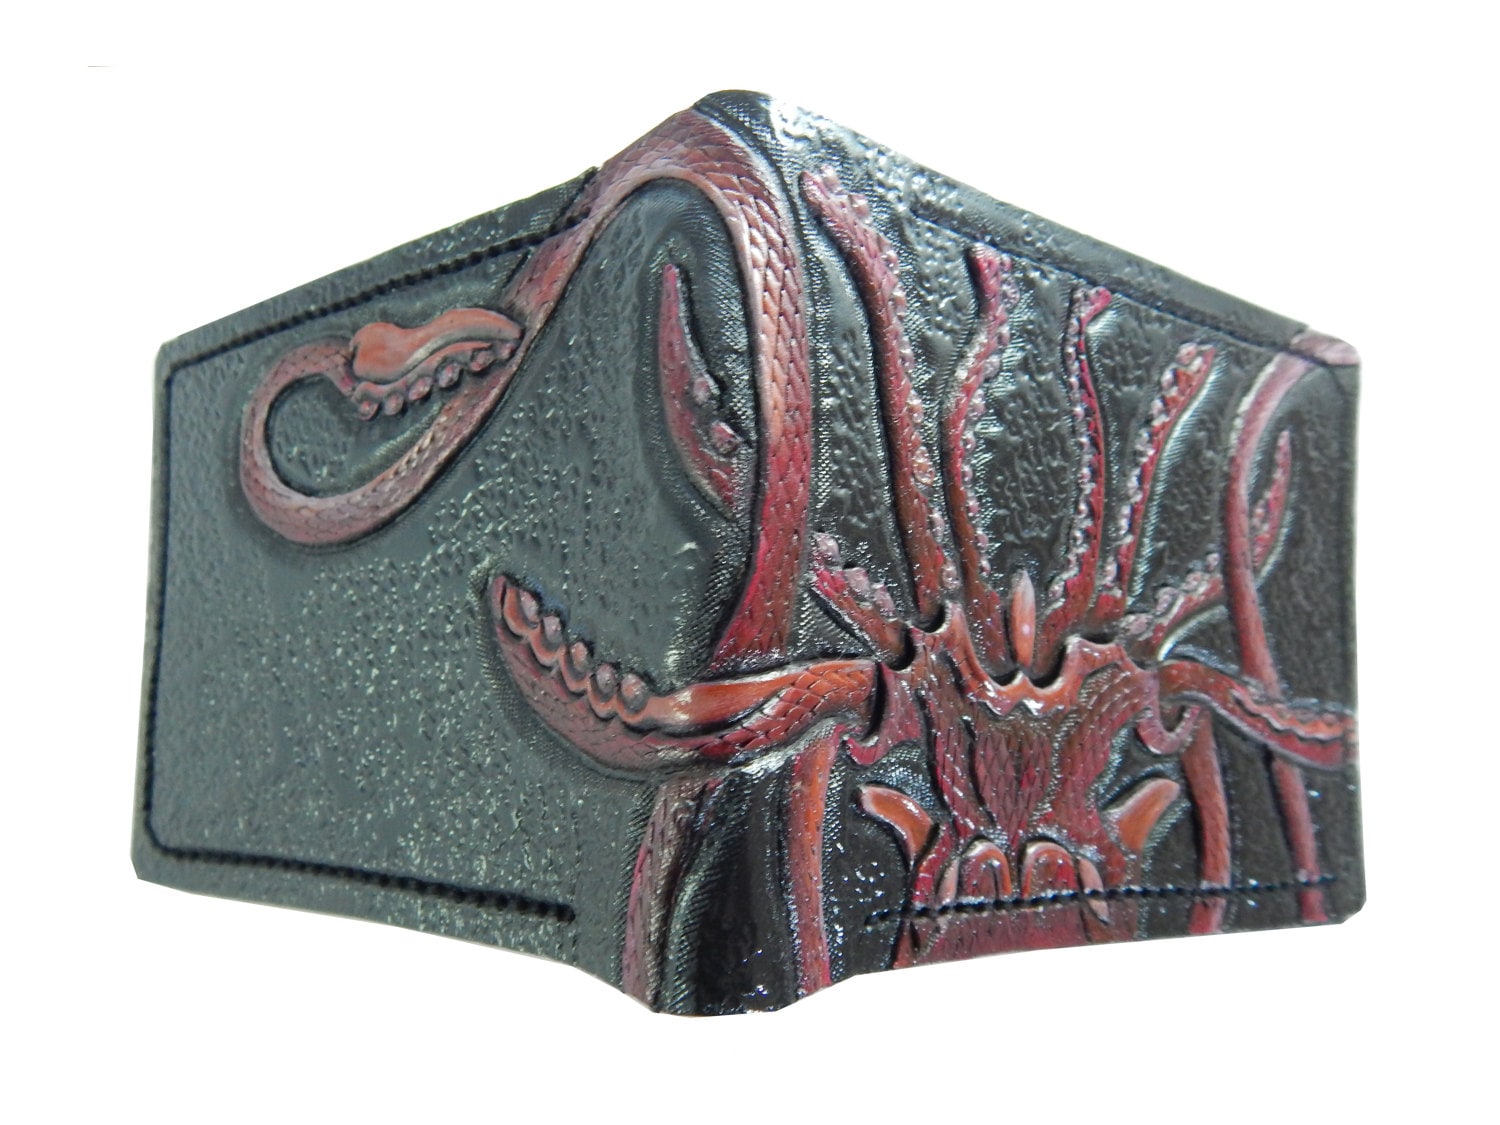 House Greyjoy wallet- Leather Bifold Wallet - Handcrafted Game of Thrones inspired Wallet -